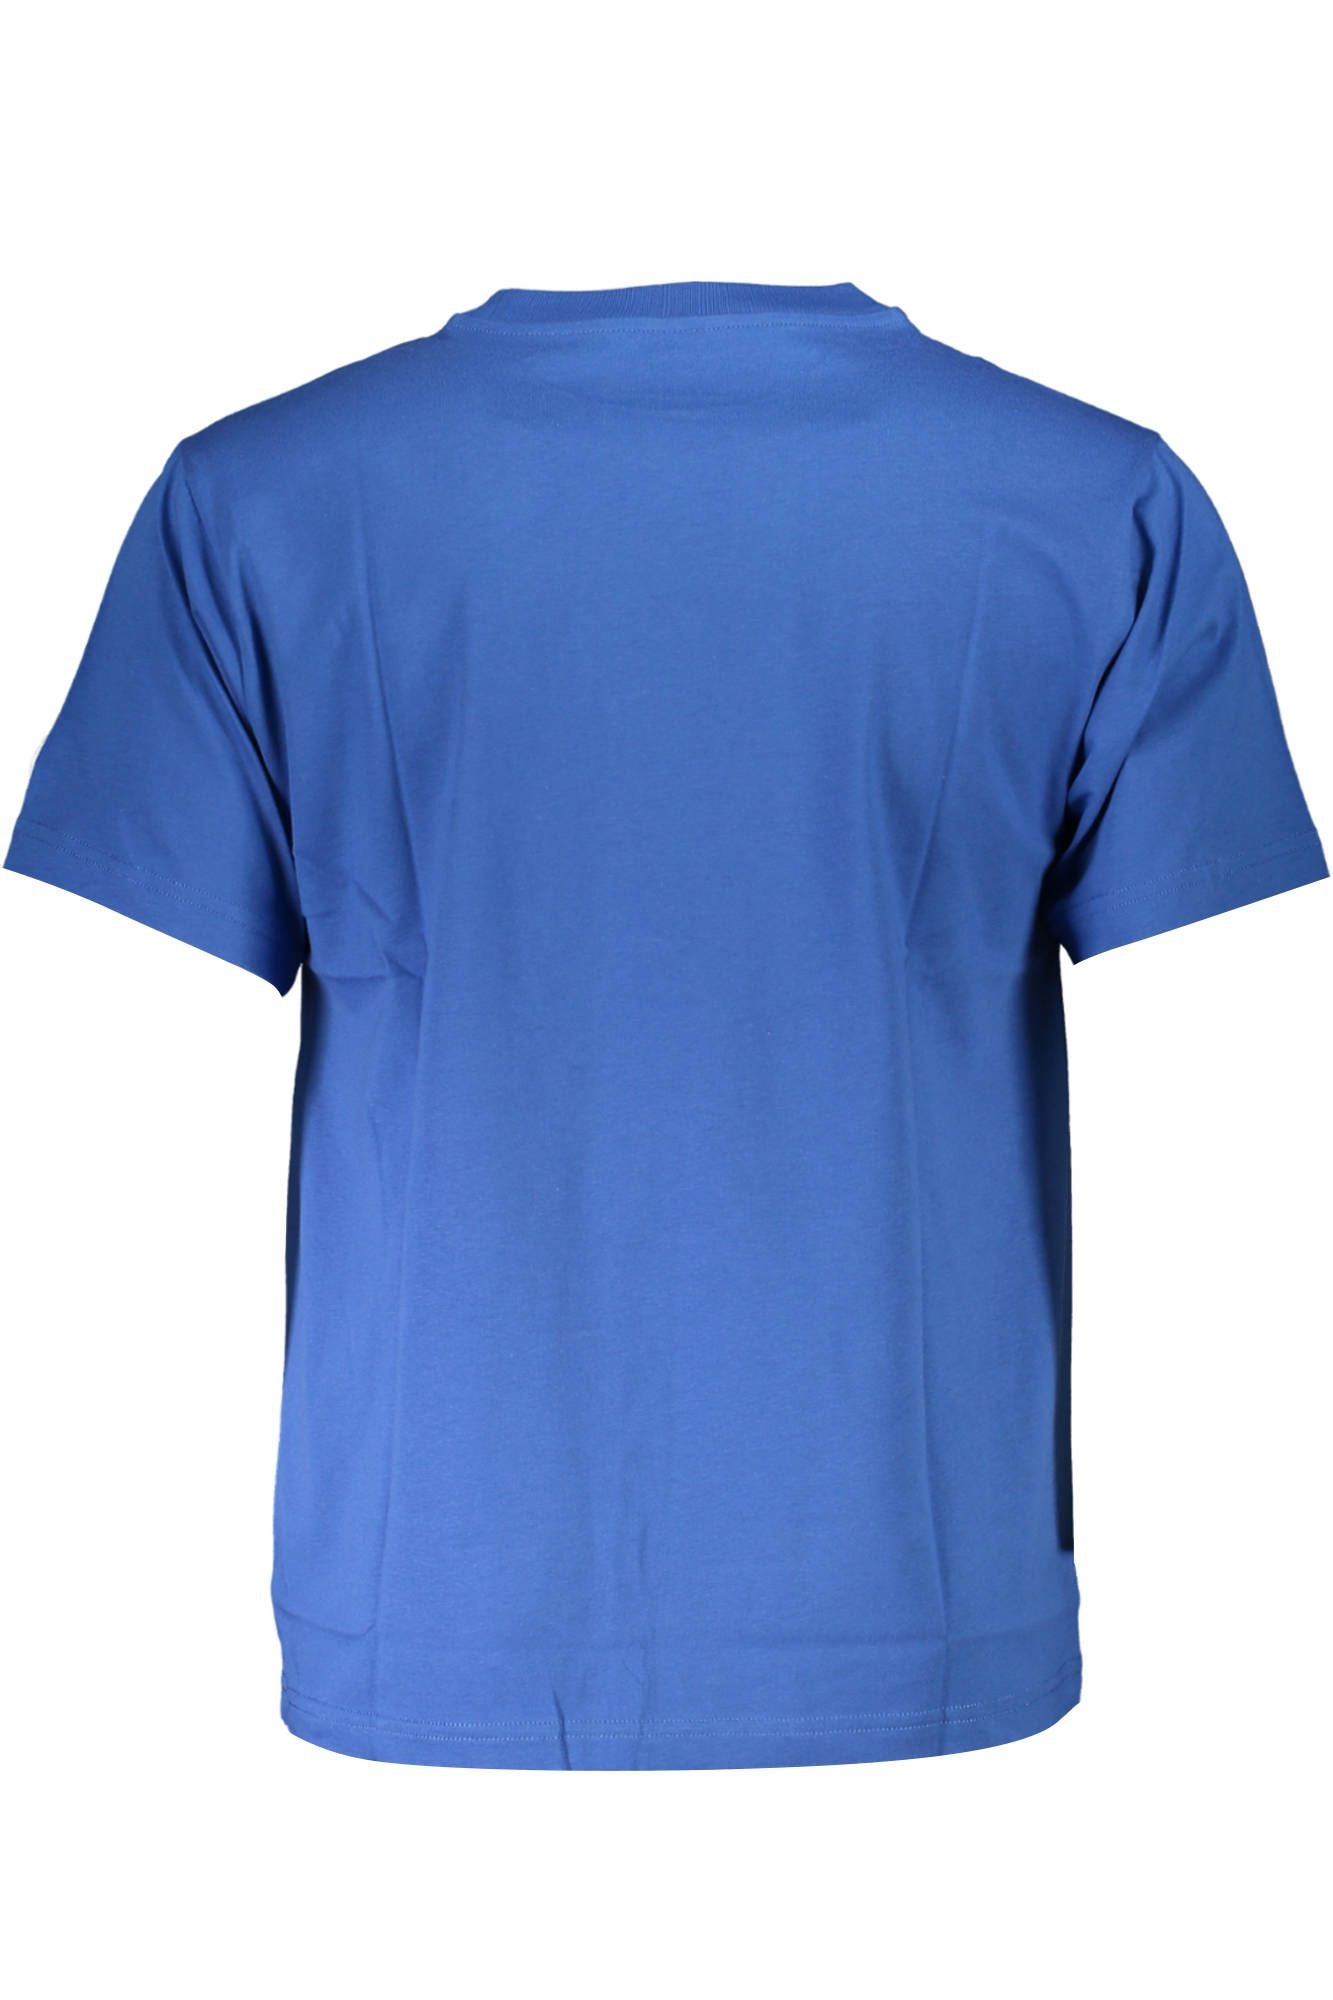 North Sails Organic Cotton Comfort Tee in Blue